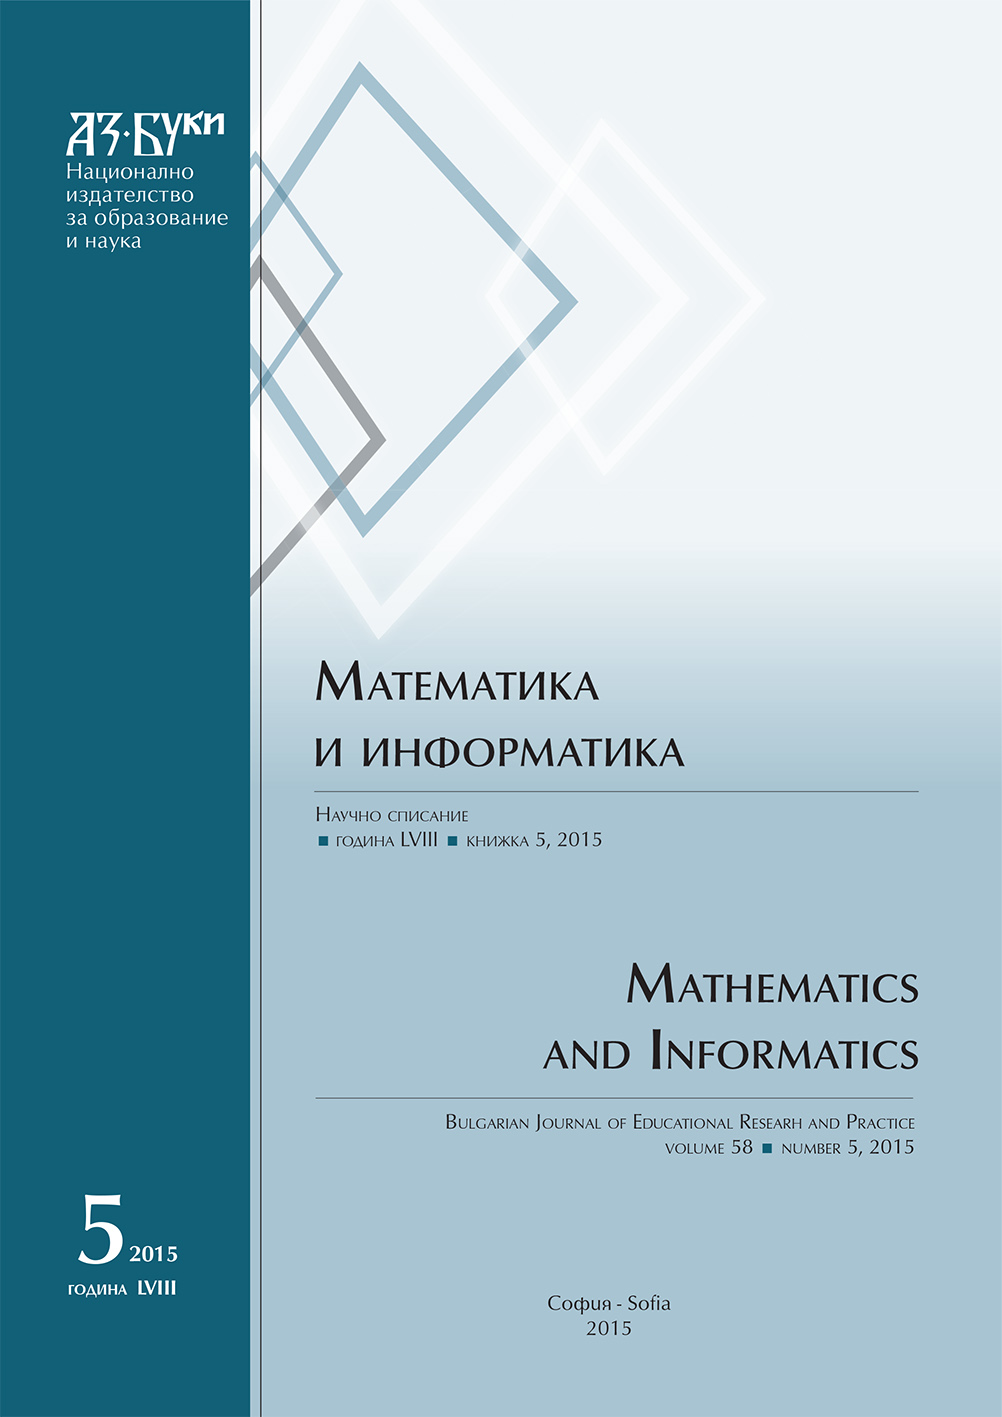 Full
Genarization of the Griffits Theorem with Conics Cover Image